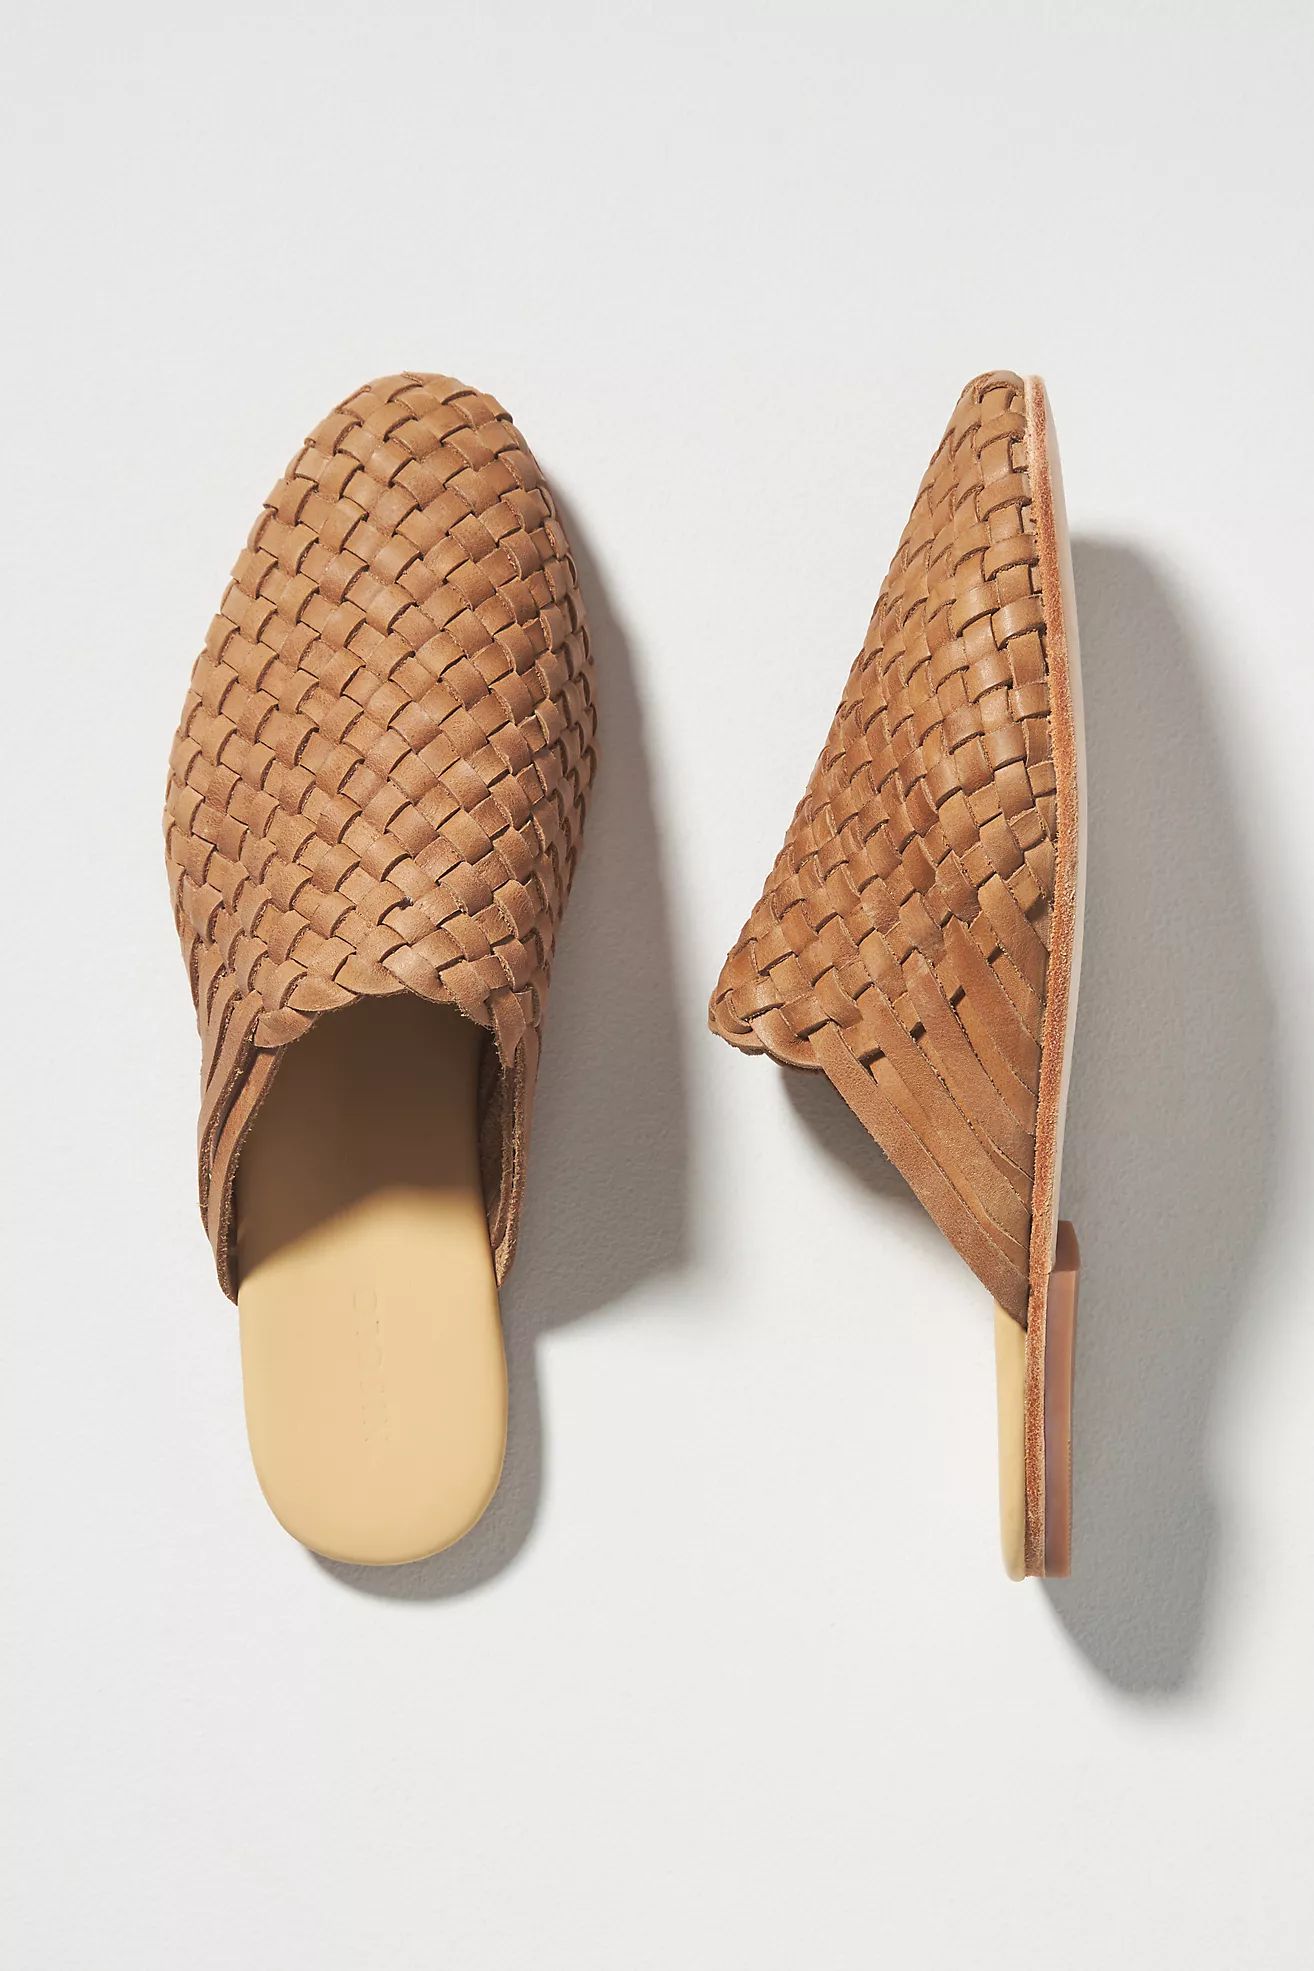 Nisolo Go-To Woven Flats | Anthropologie (US)